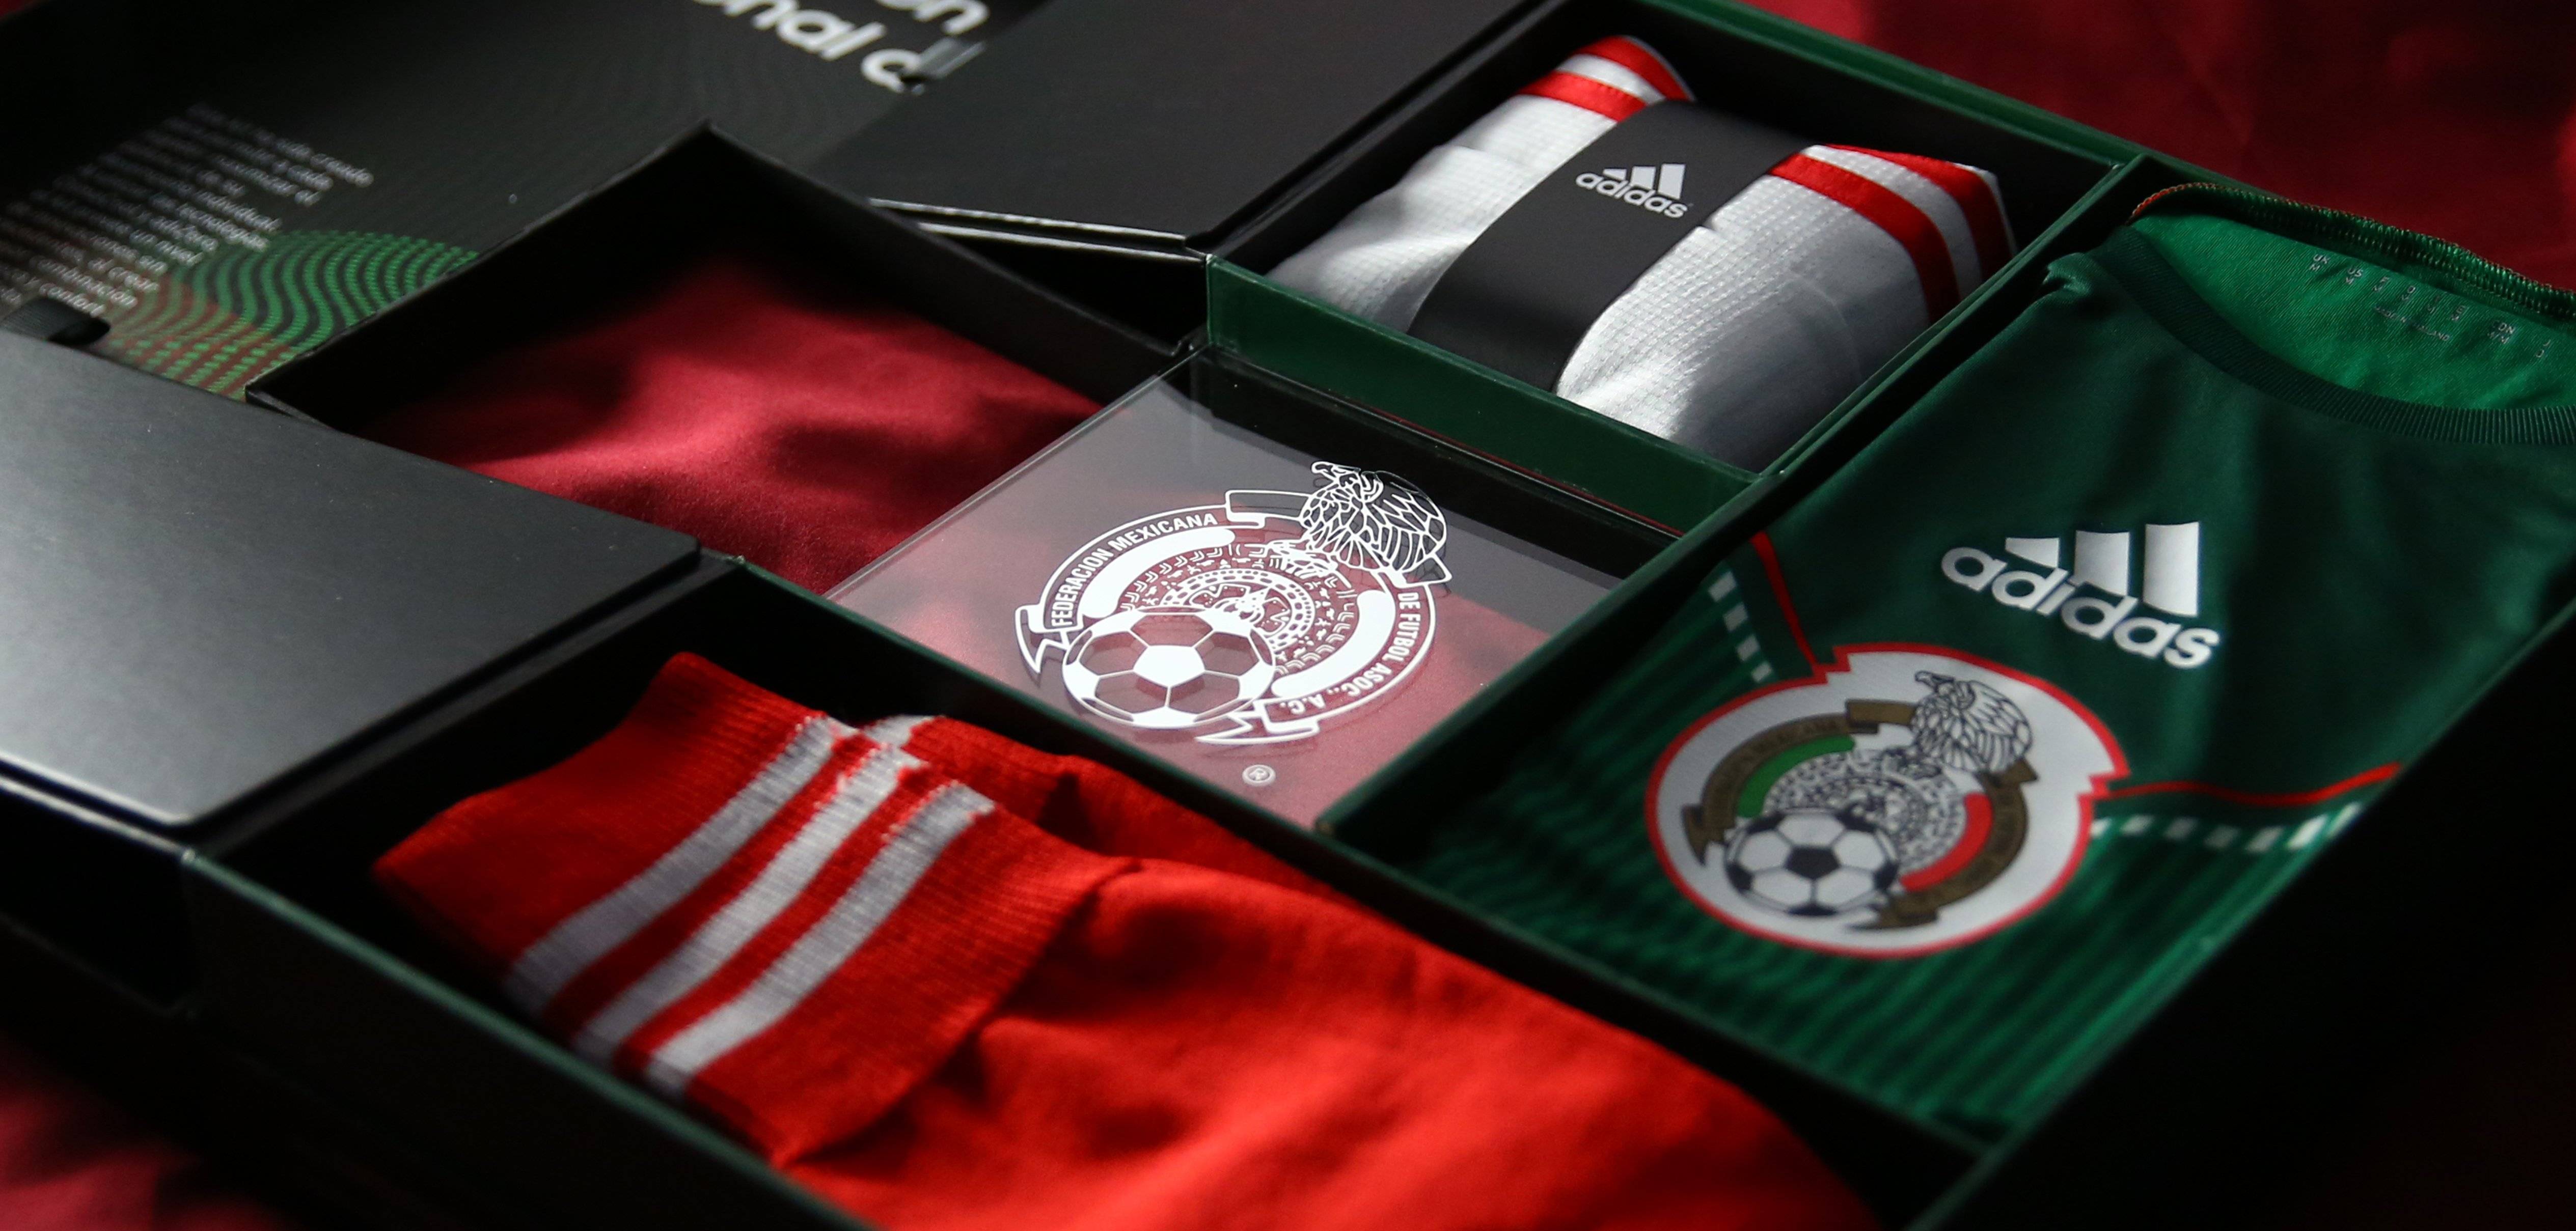 Mexico National Football Team Wallpapers